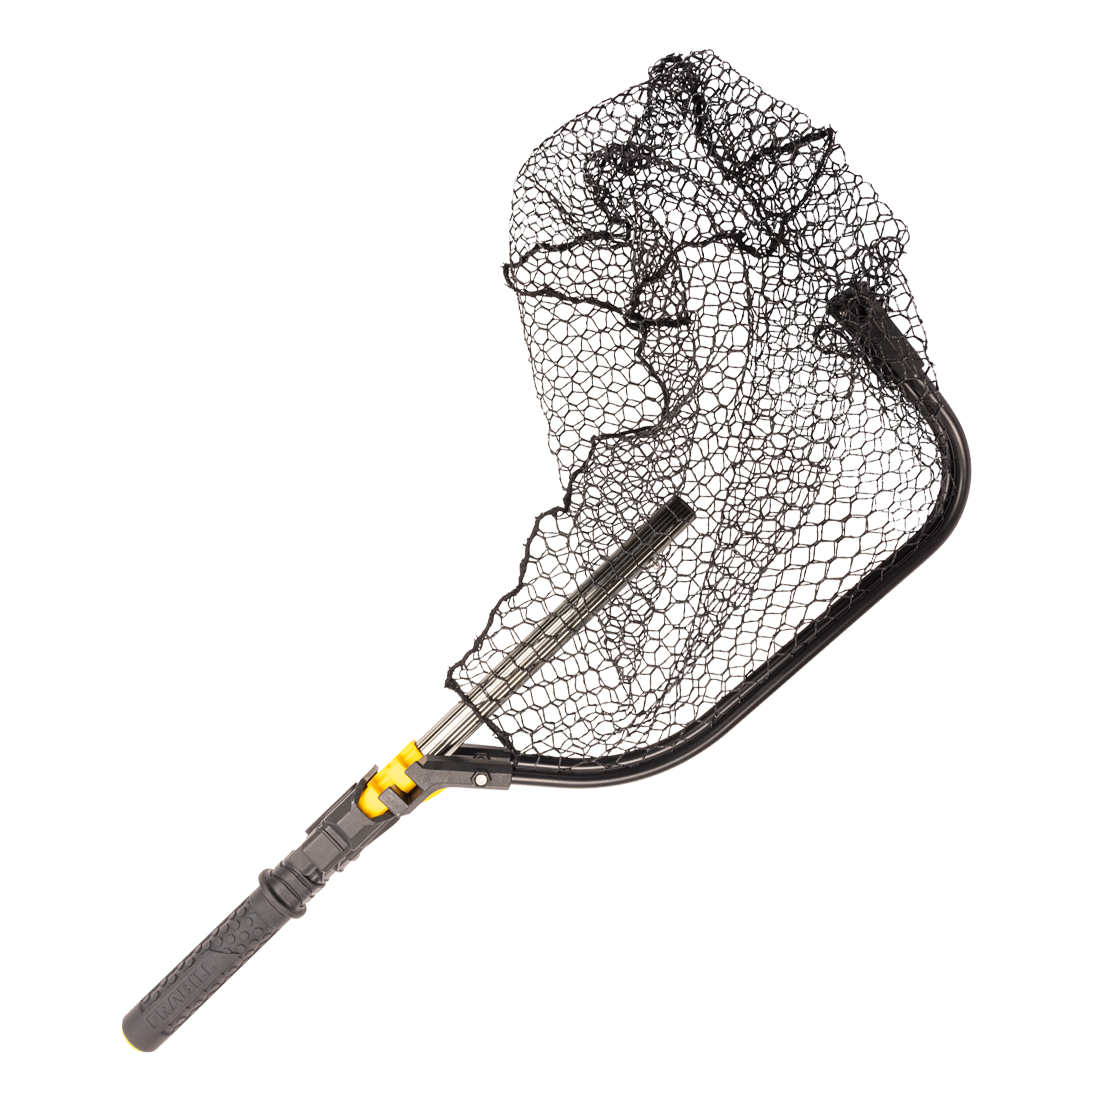 Frabill Conservation Series Landing Net with Camlock Reinforced